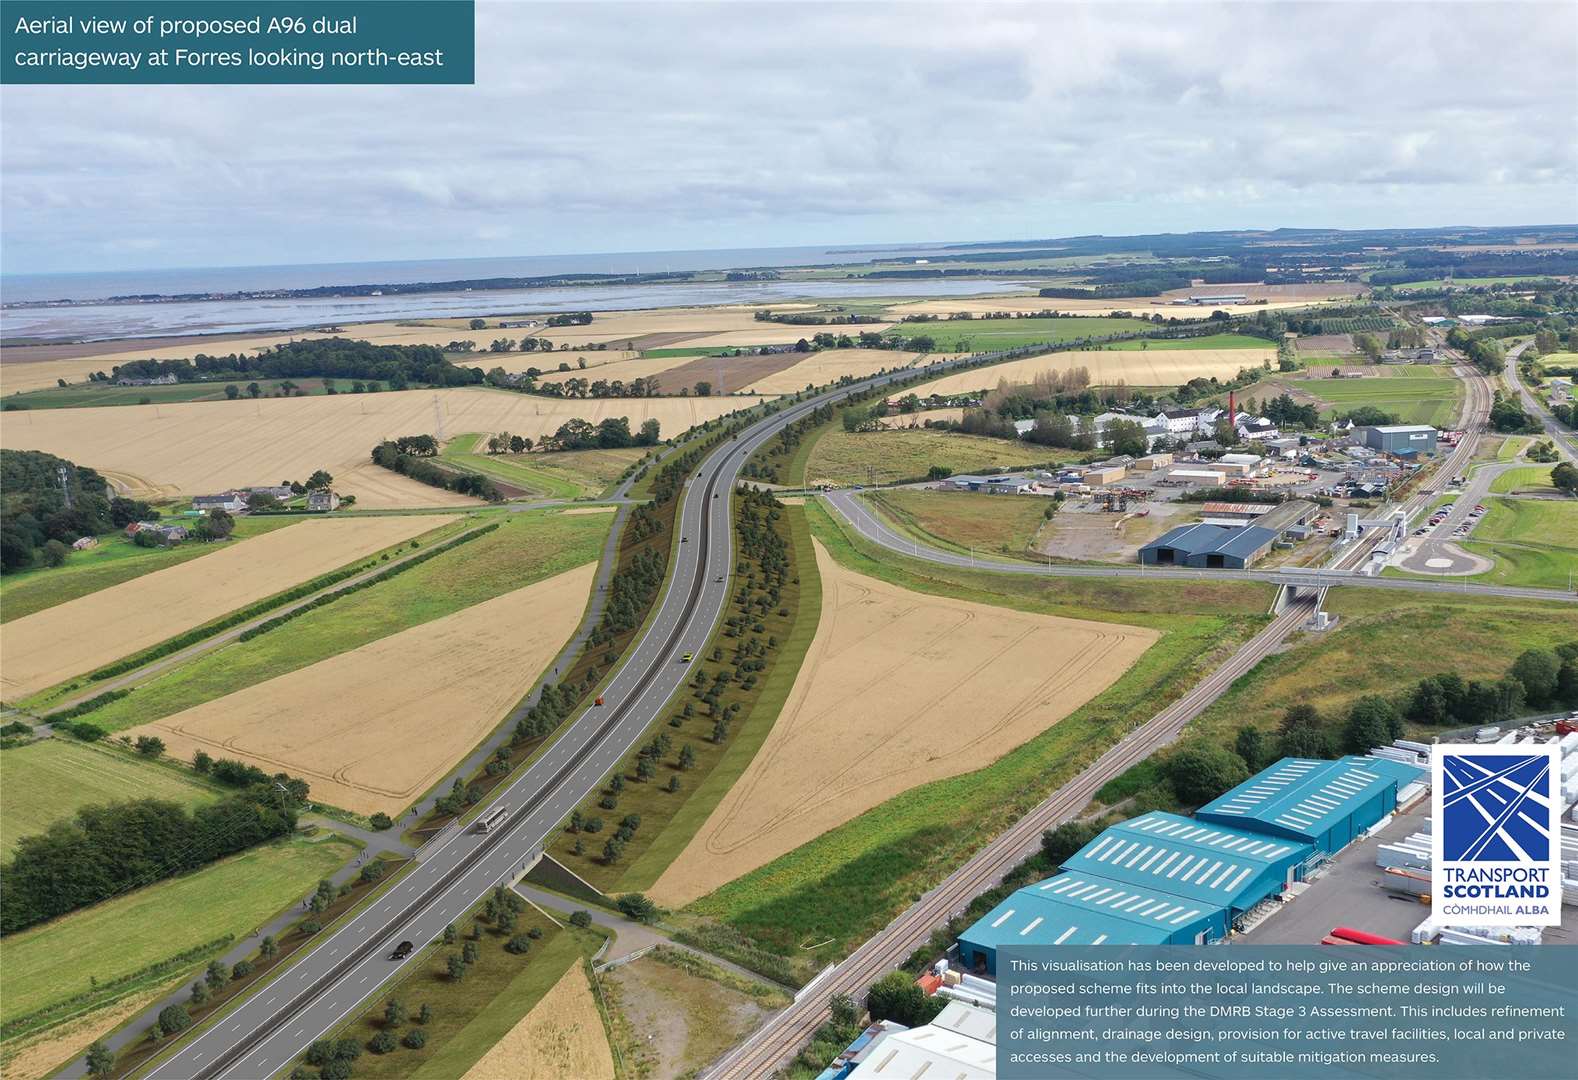 Transport Scotland’s aerial view of the proposed A96 dual carriageway at Forres, looking north-east, includes a foot and cycle path on the north side.